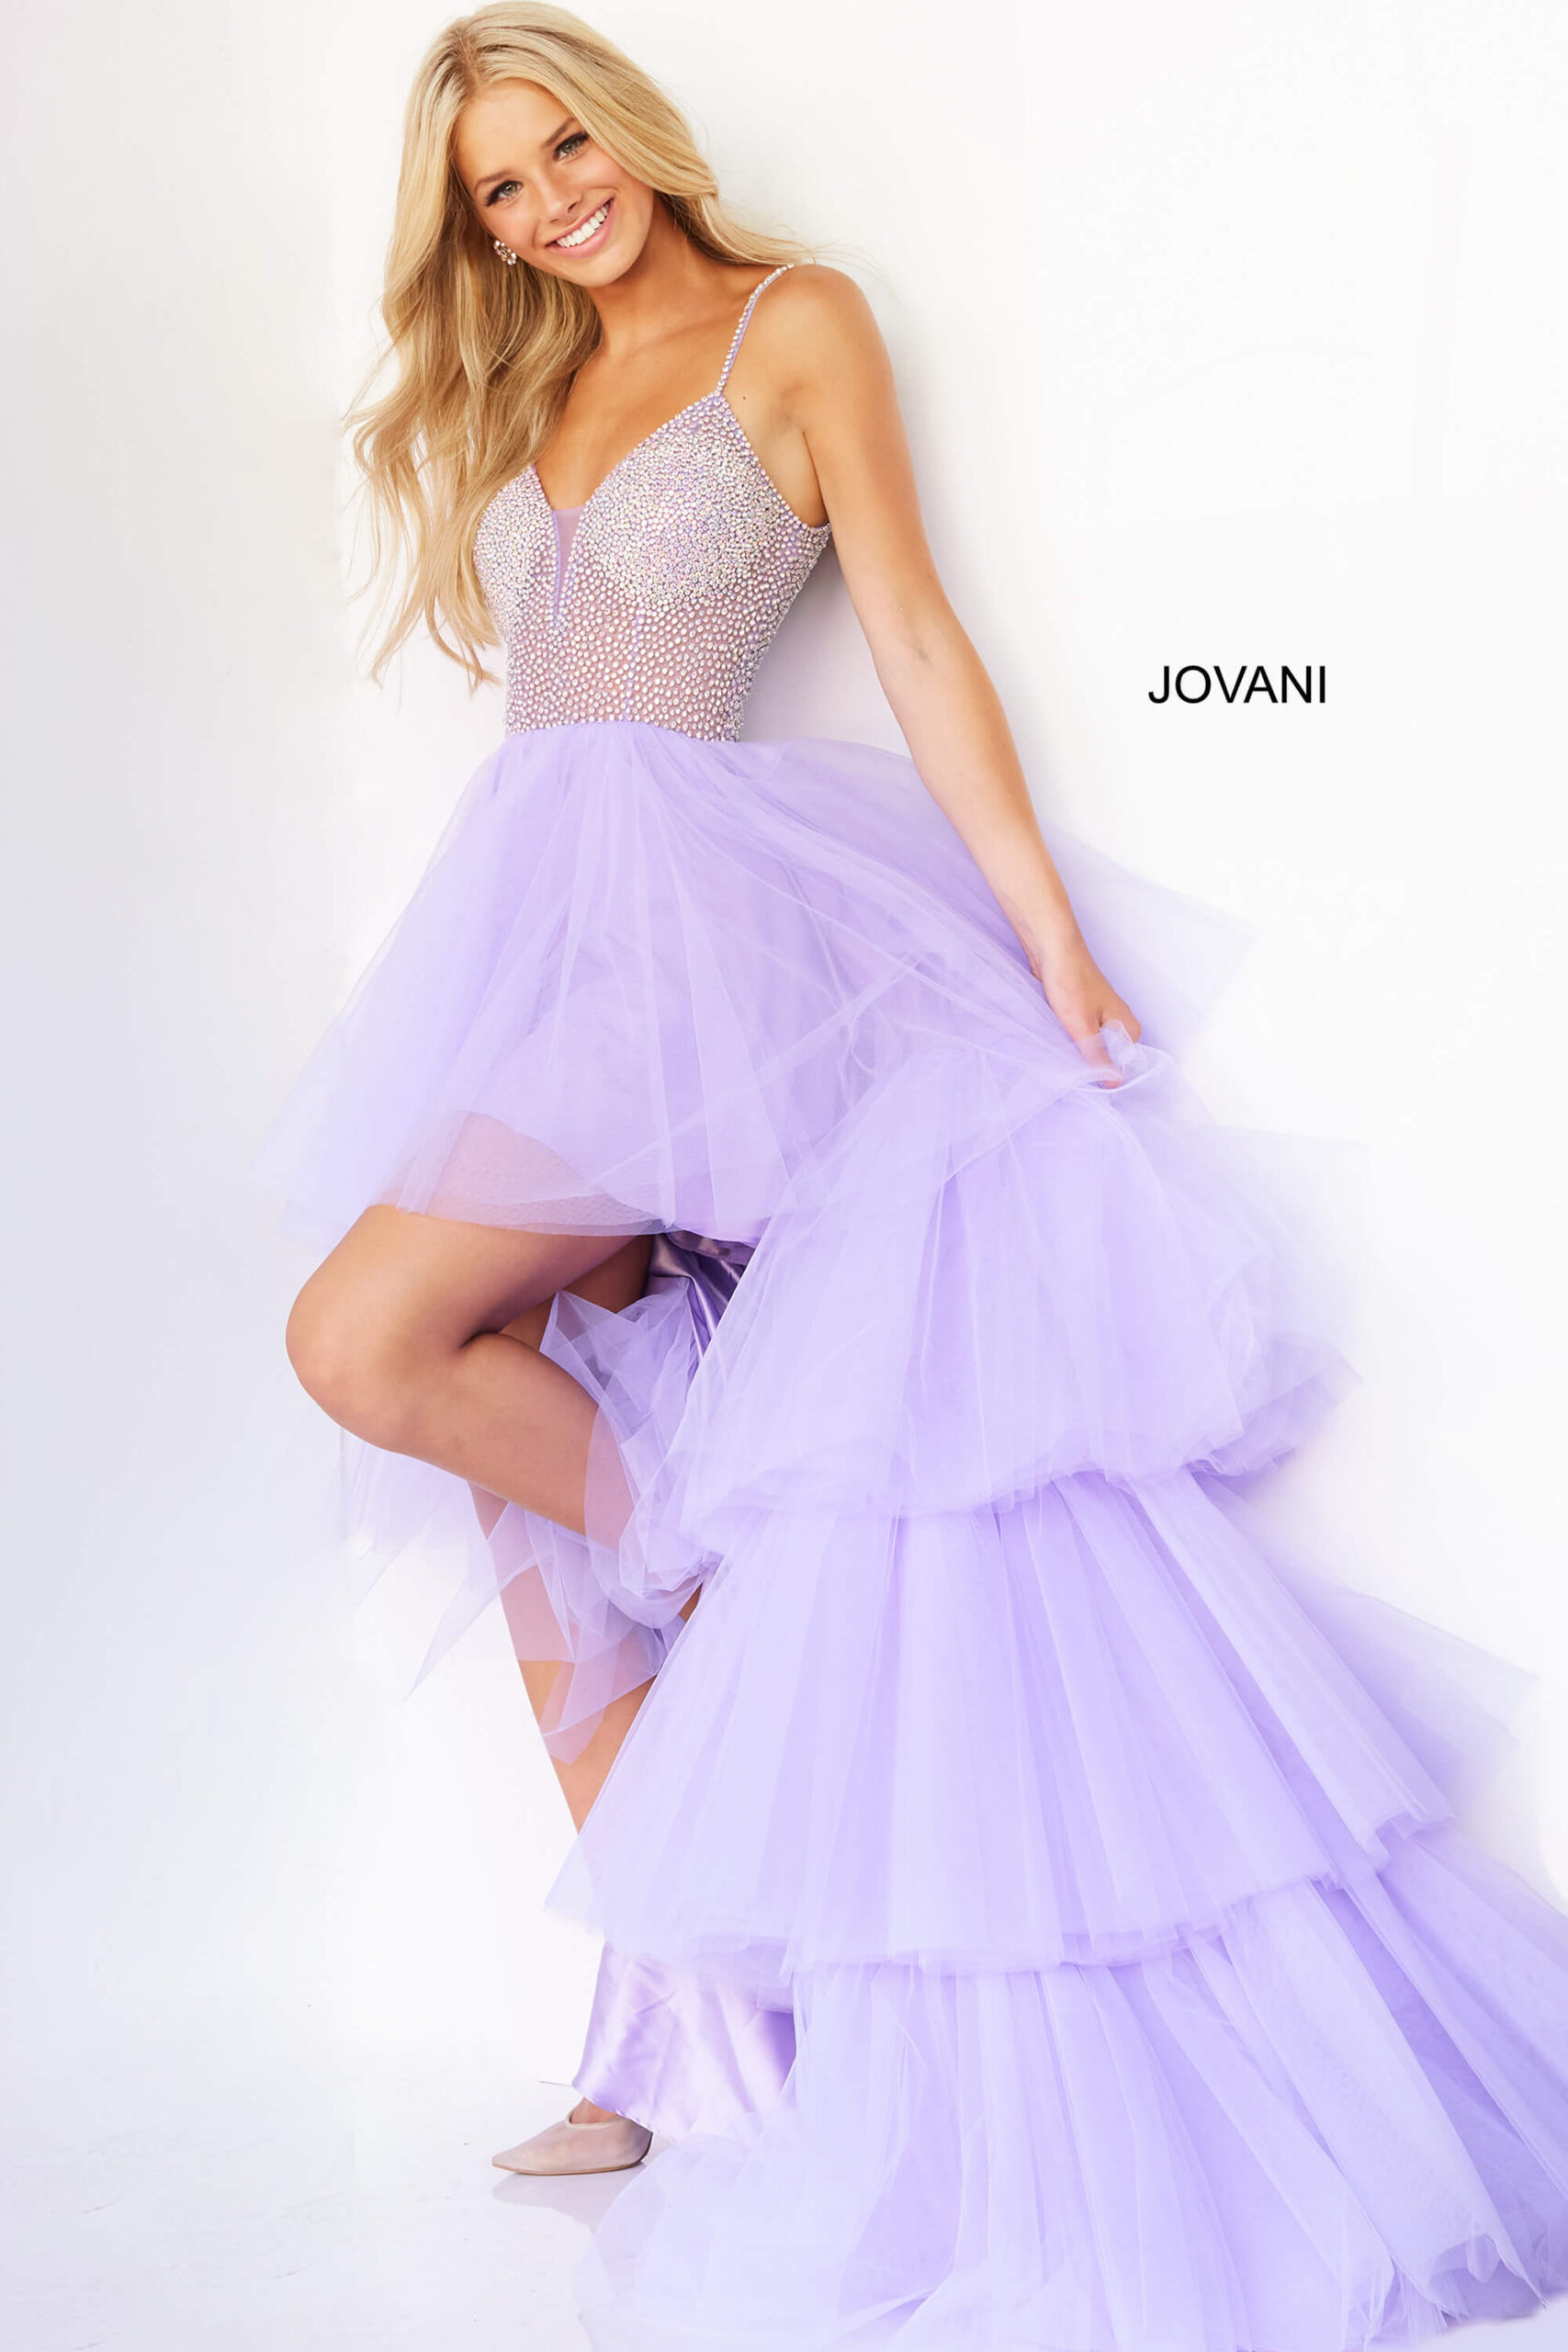 Jovani 07231 Lilac High Low Embellished Bodice Party Gown